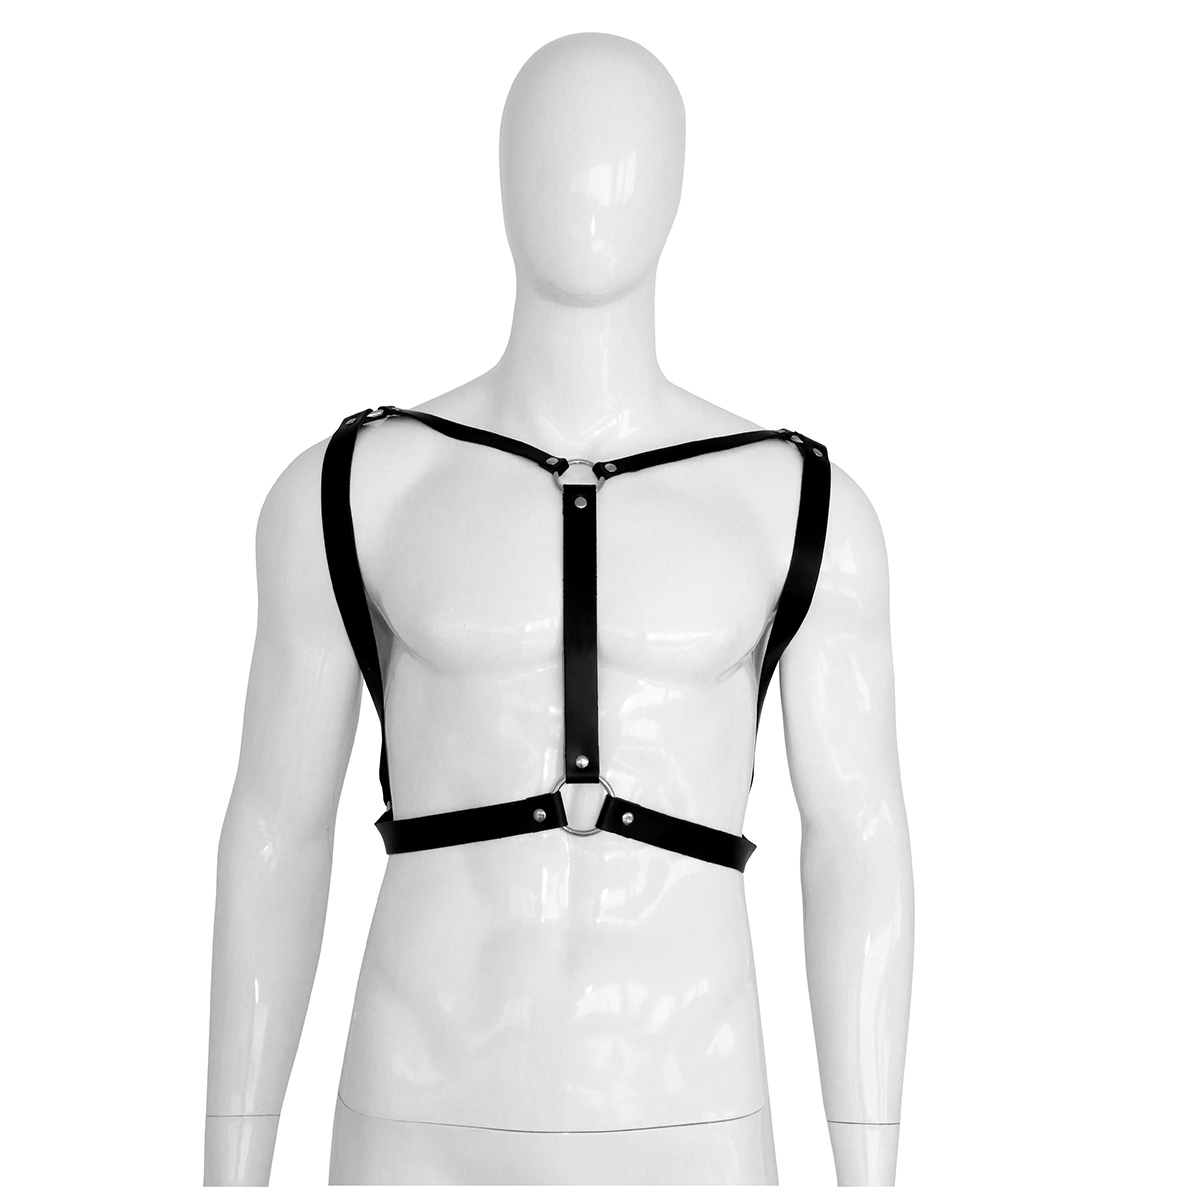 Men’s leather harness S/M